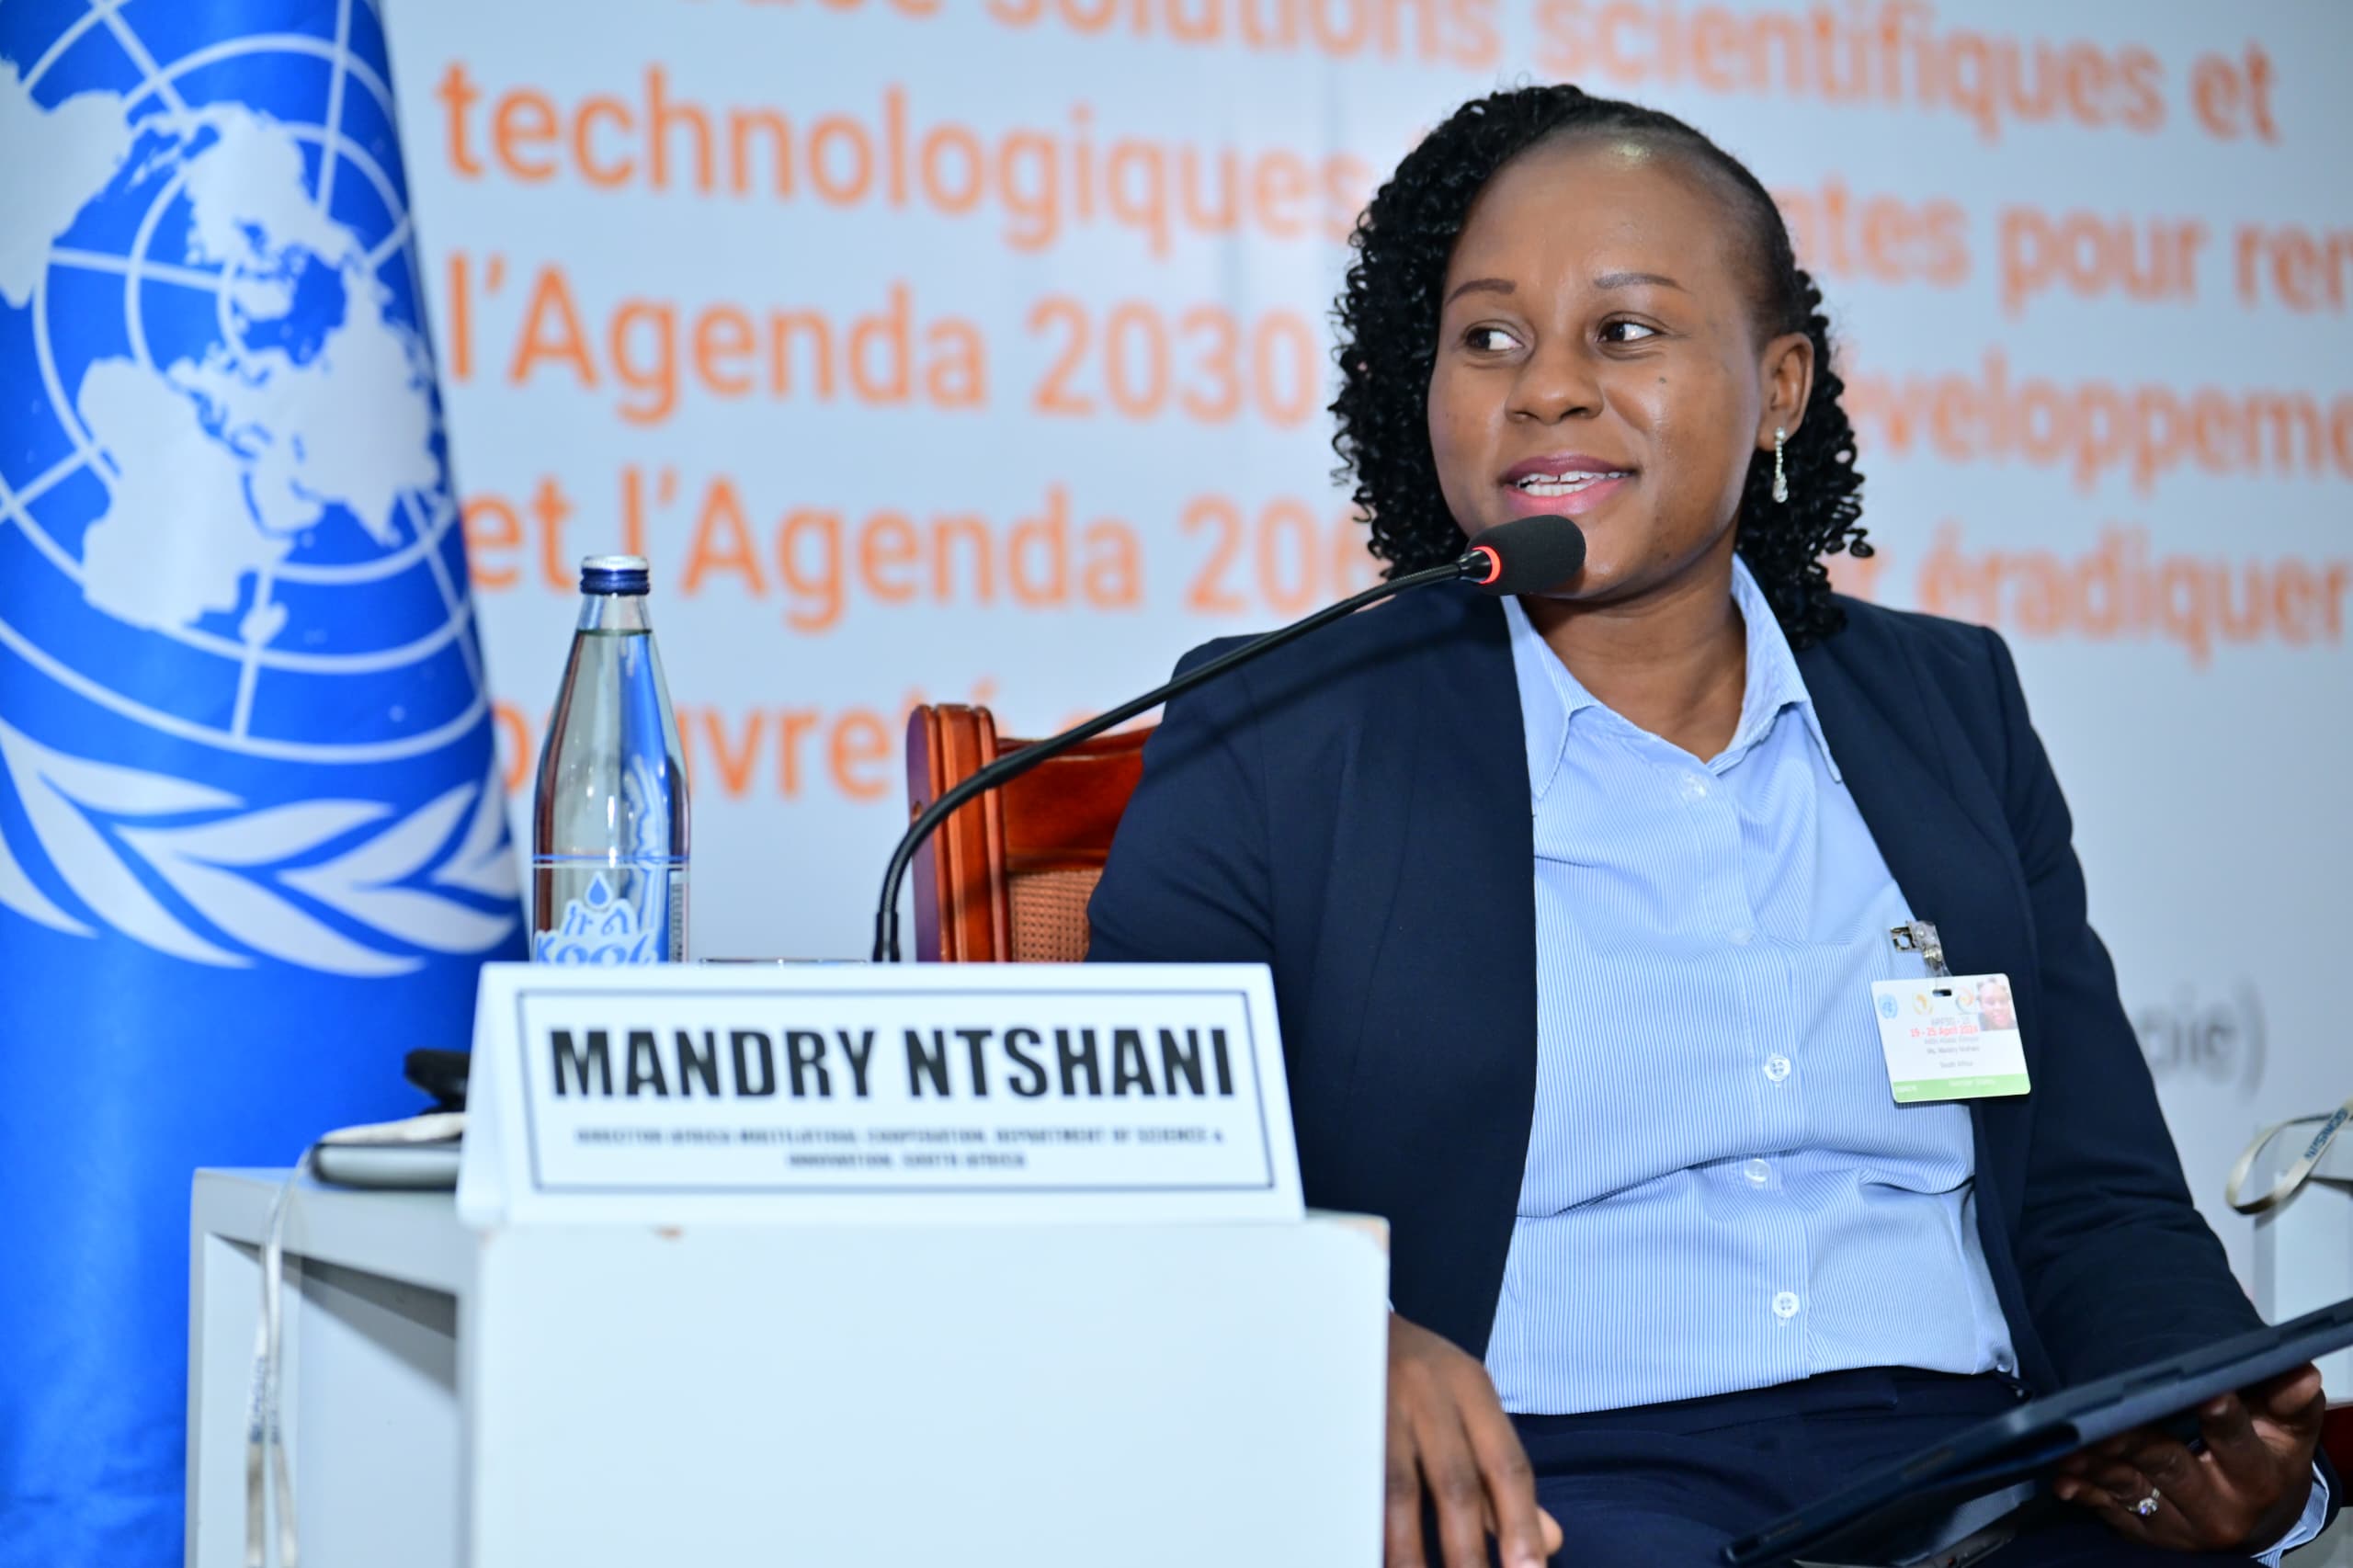 6th African Science, Technology, and Innovation Forum - Day 2 in pictures